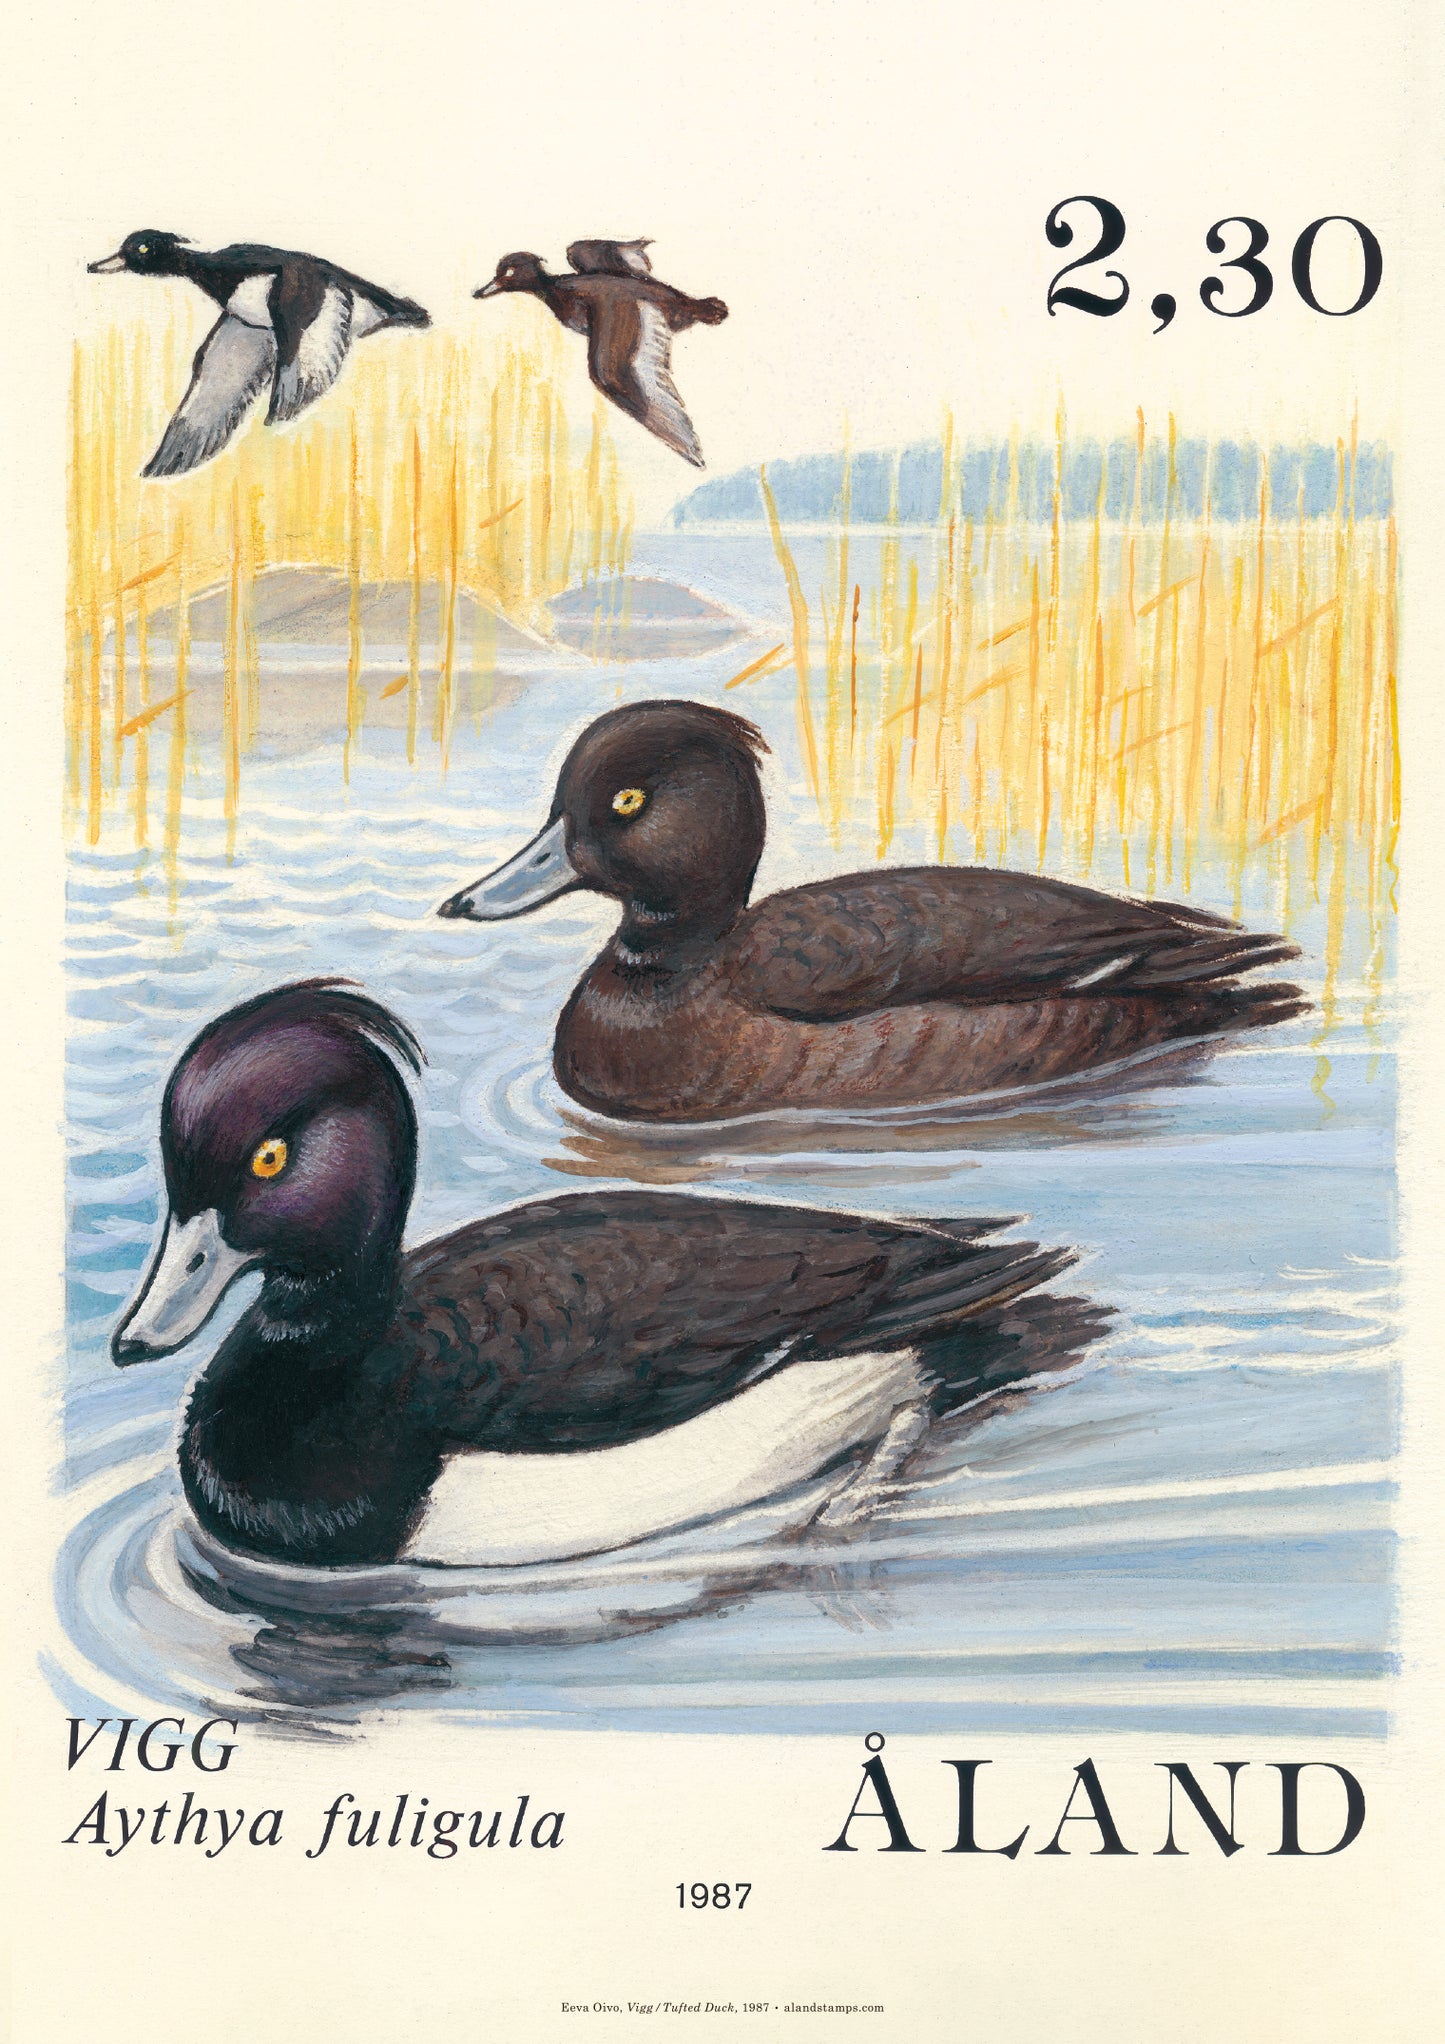 Heritage collection - Tufted duck, 50x70